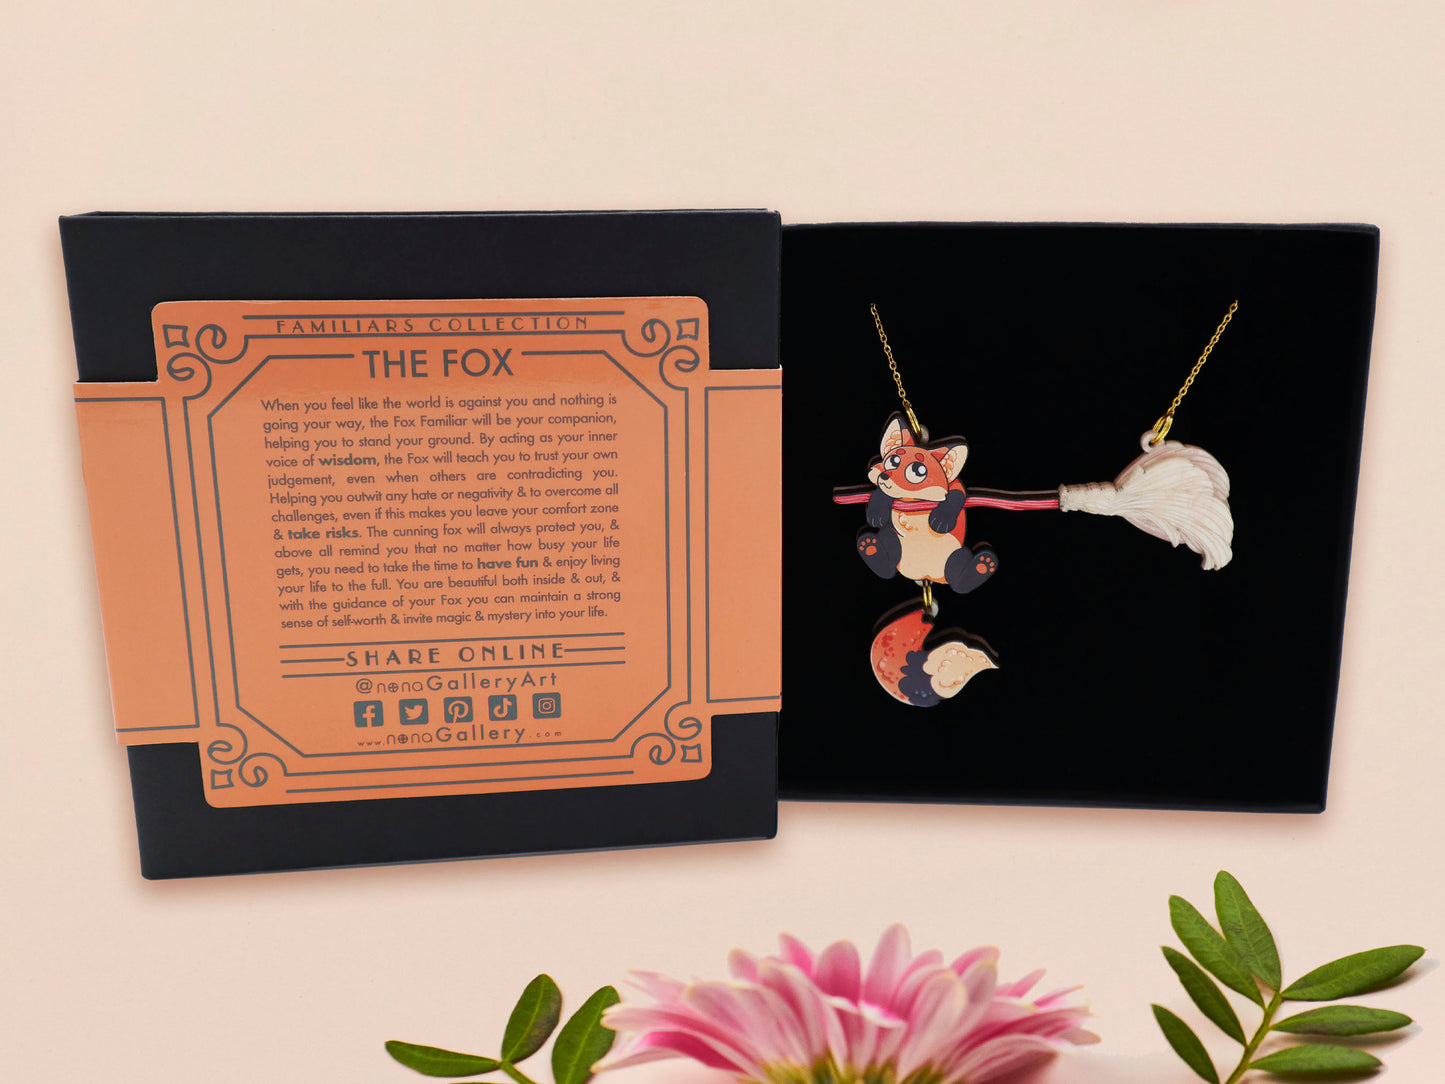 Mixed material handmade necklace of chibi cartoon Fox hanging on to a pearlescent witches broomstick, with a gold chain and black gift box with an orange familiars collection gift sleeve.